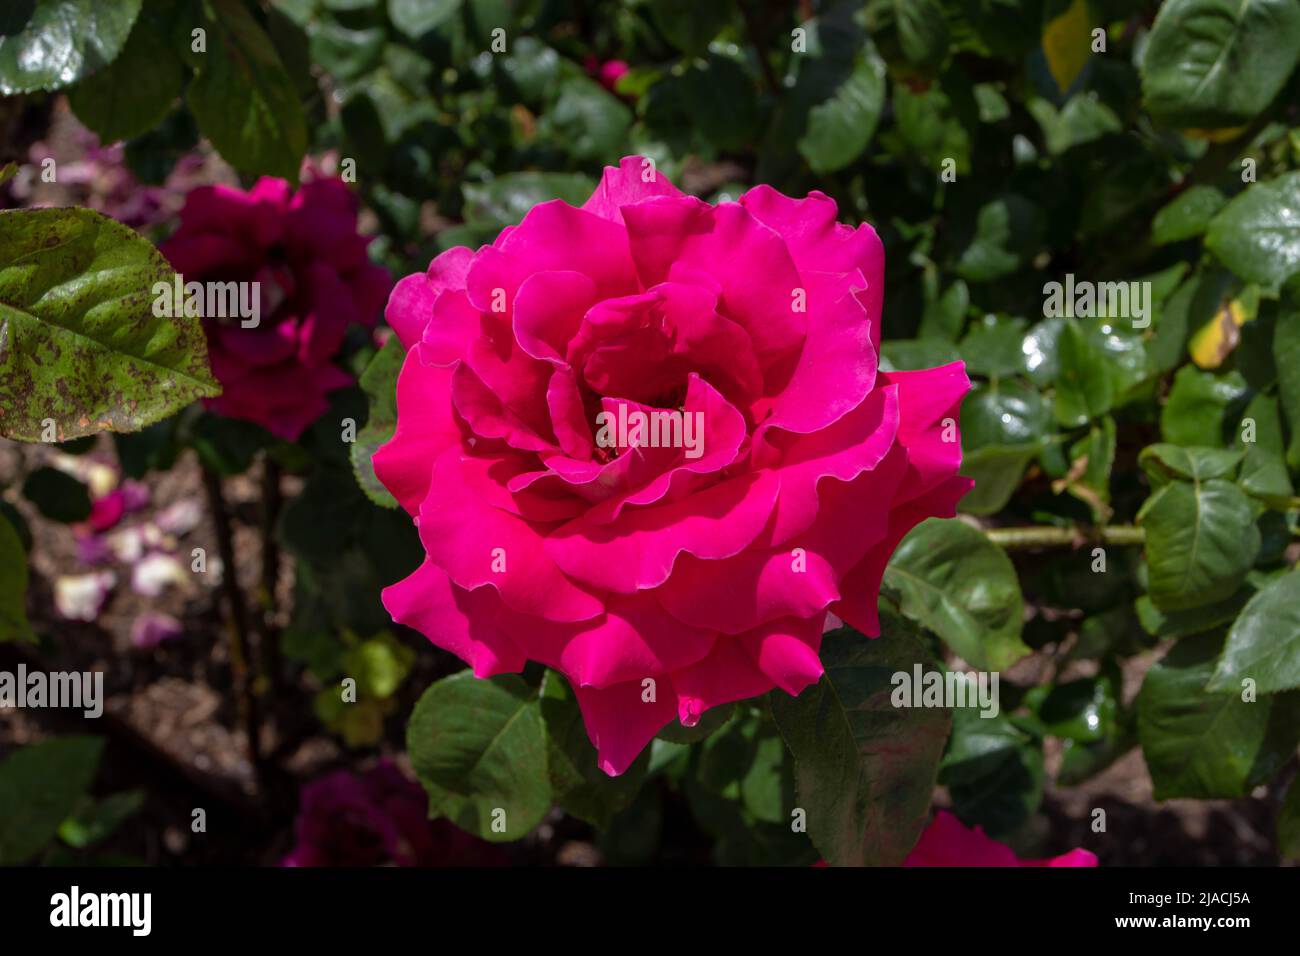 Bright magenta shrub rose flower with curly petals in the sunny garden Stock Photo